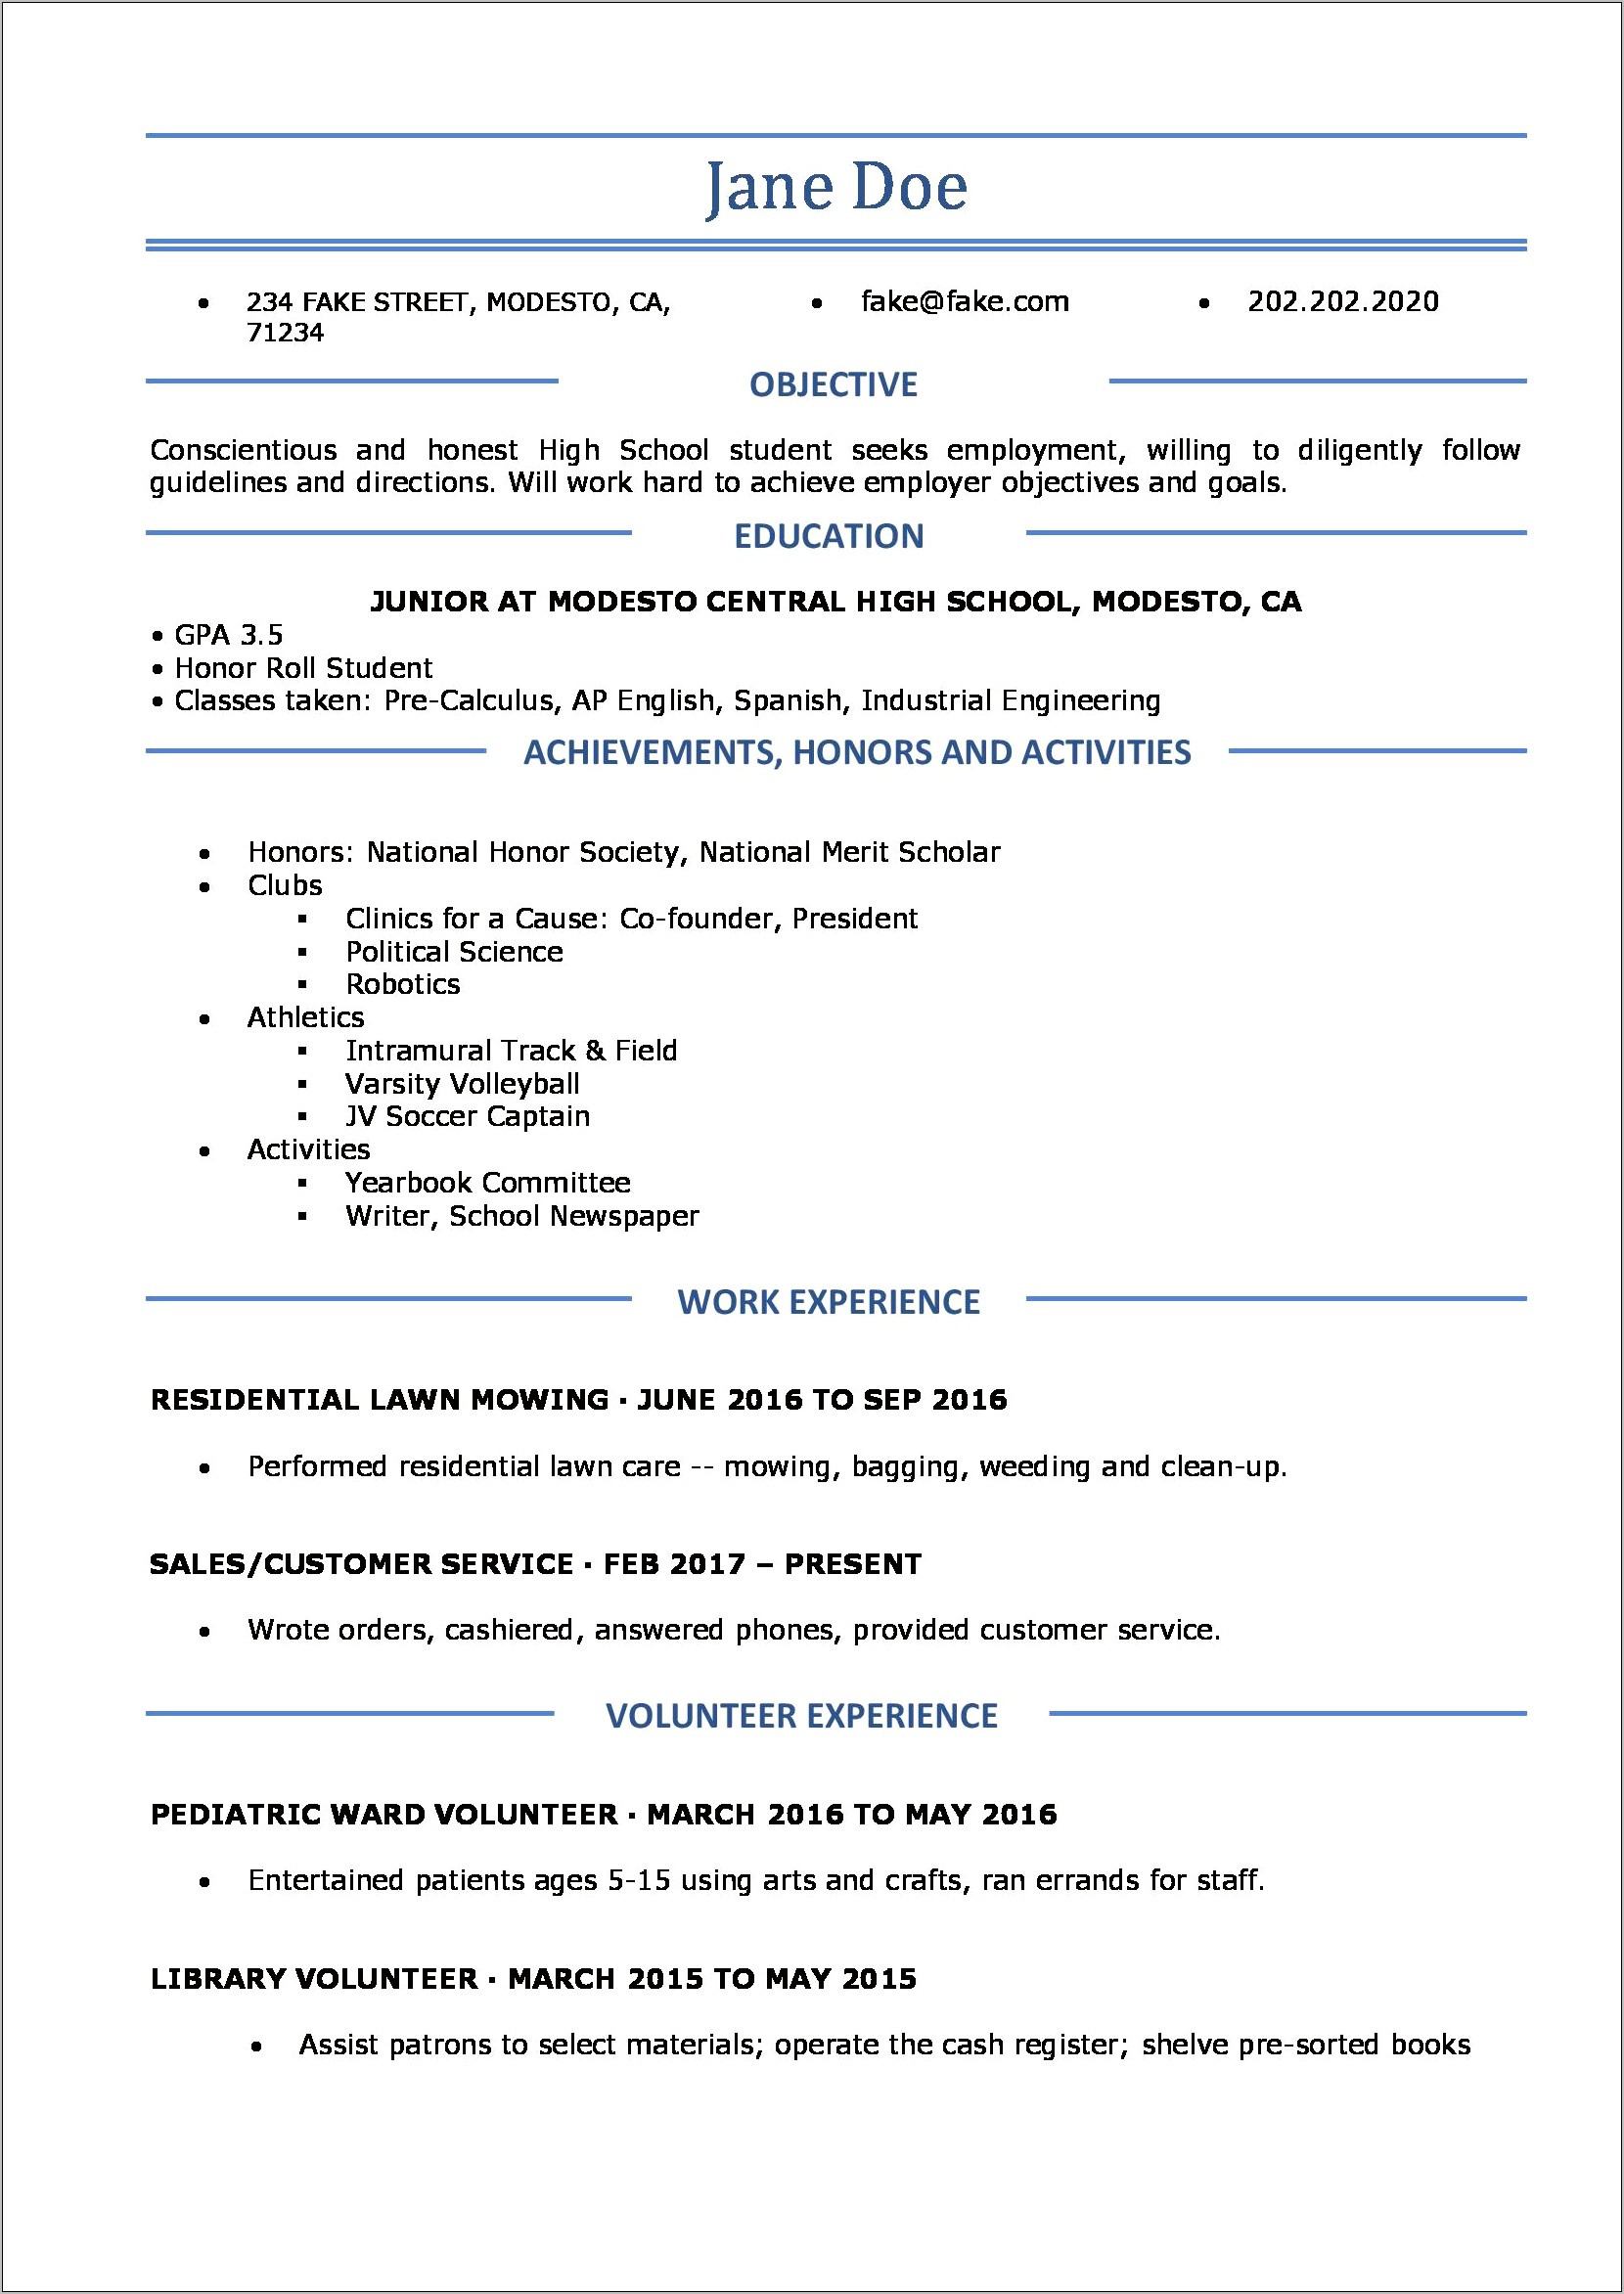 Best Wtyle Of Resume For High School Graduates